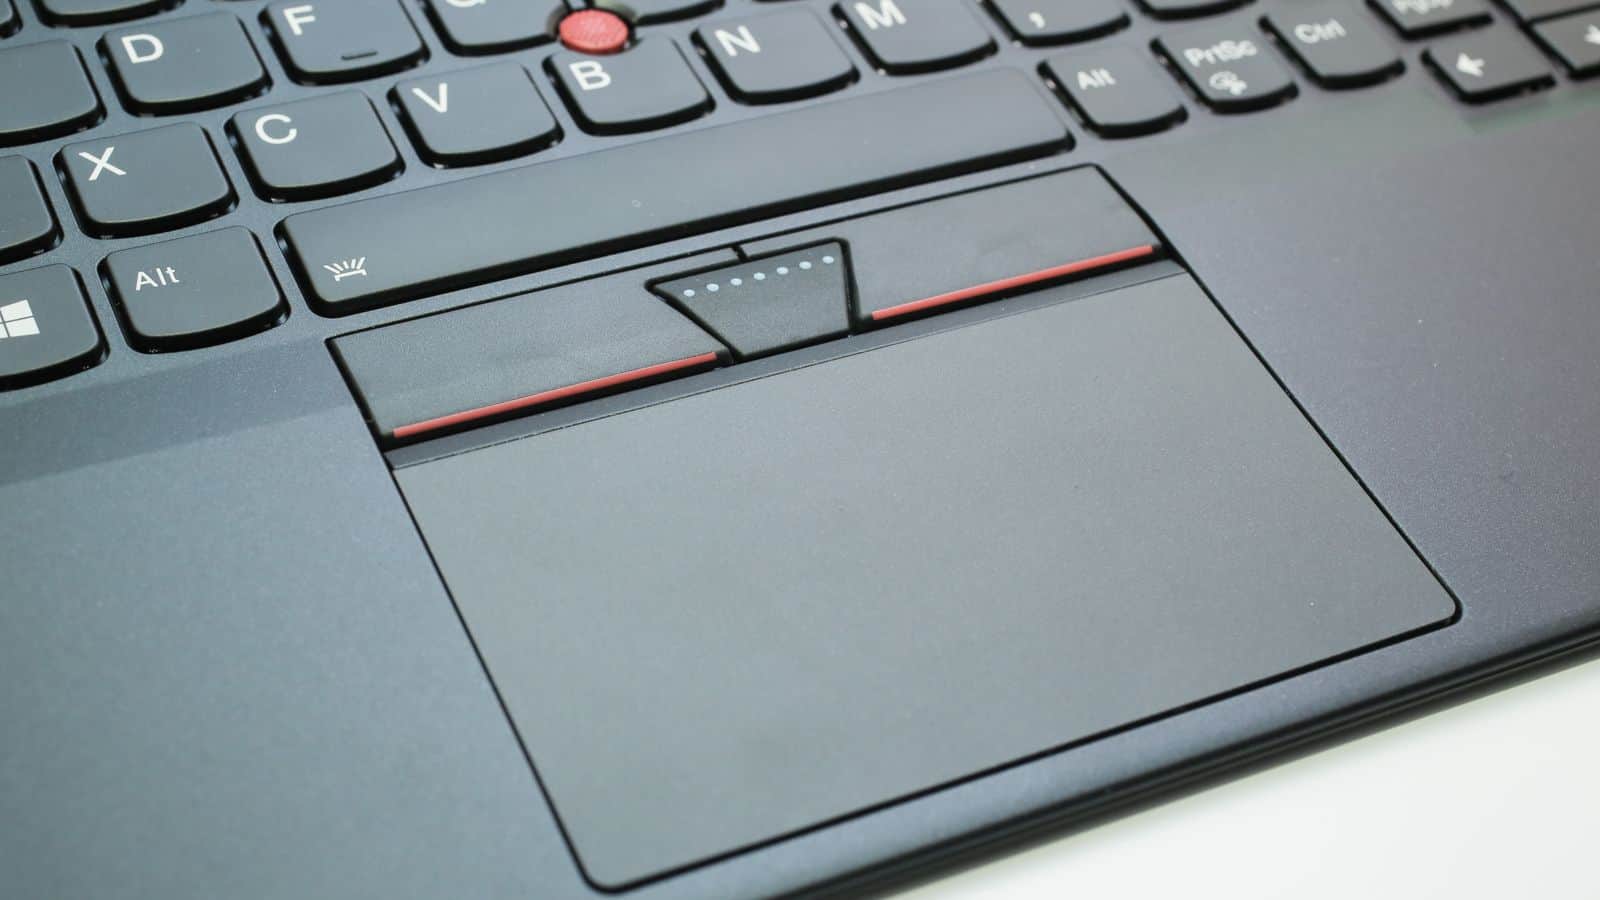 How To Disable Touchpad On Laptop